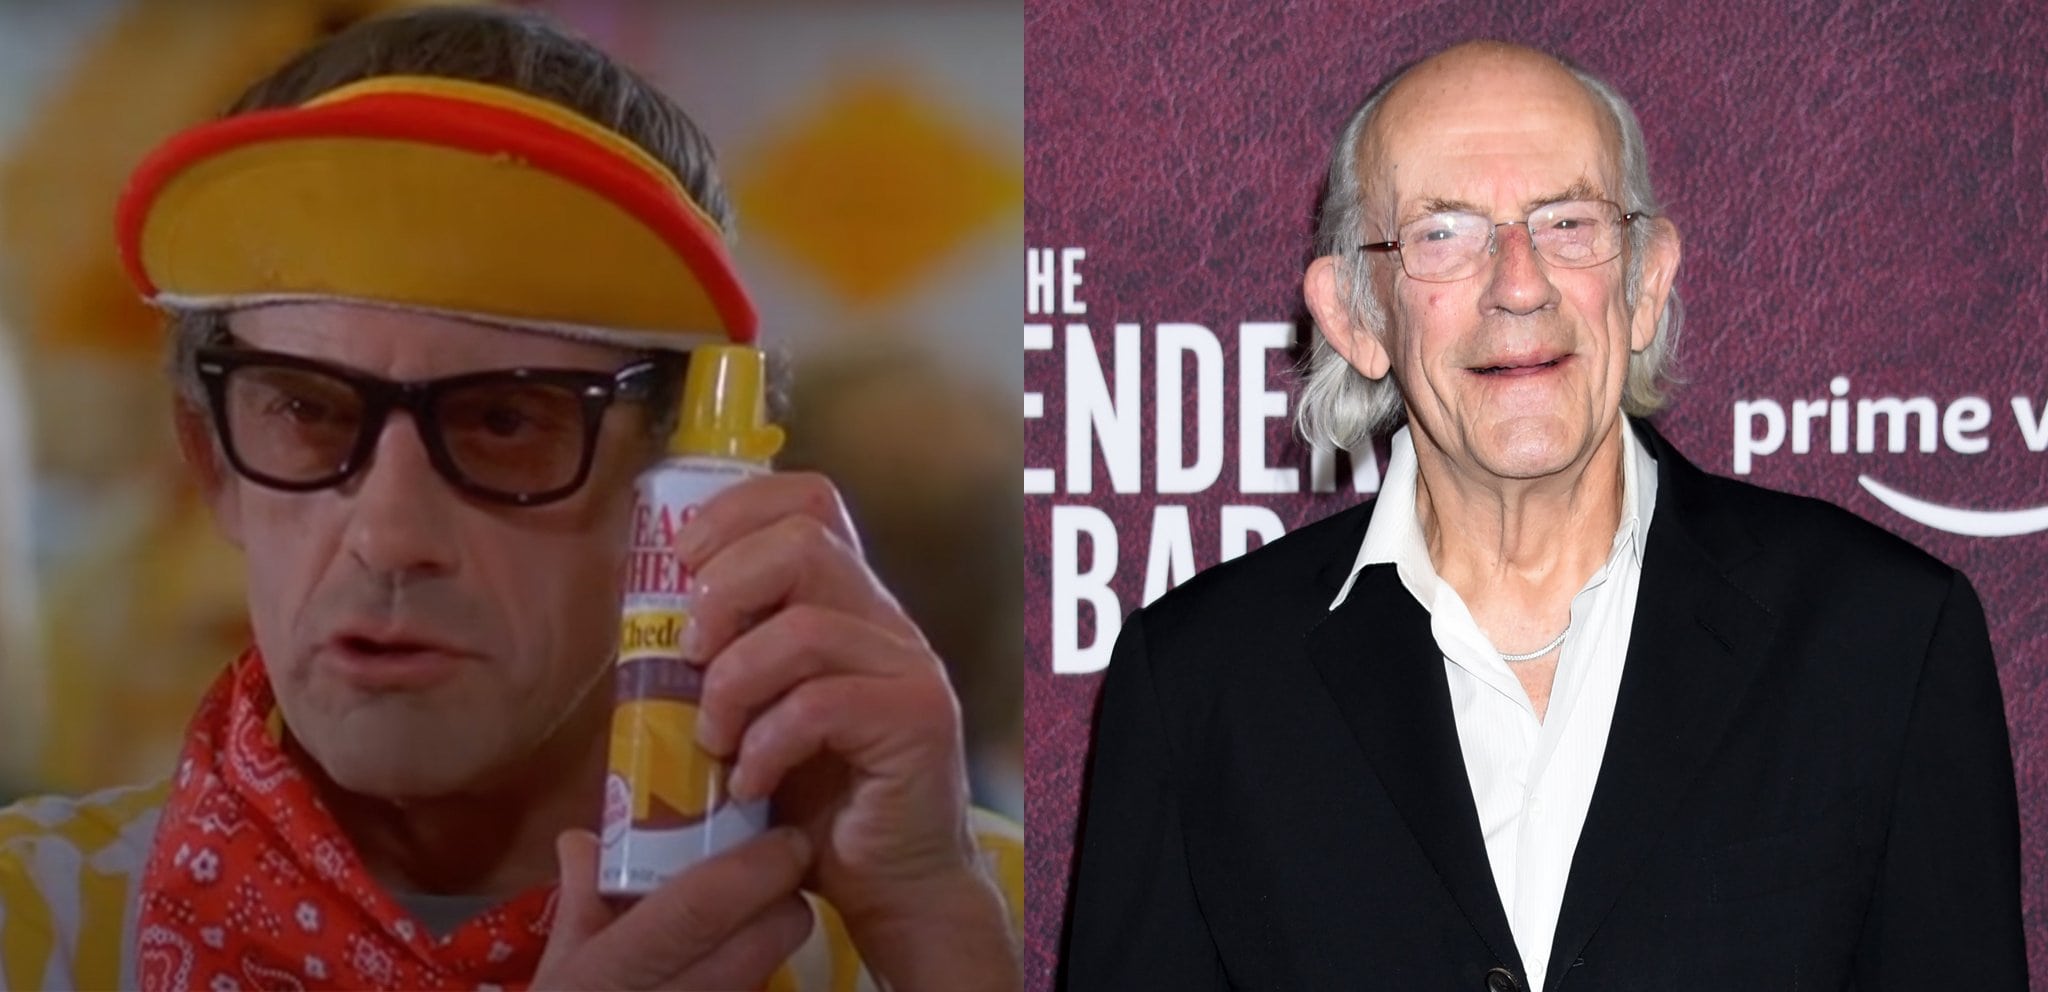 Christopher Lloyd recently appeared asGrandpa Moehringer in the George Clooney-directed film The Tender Bar